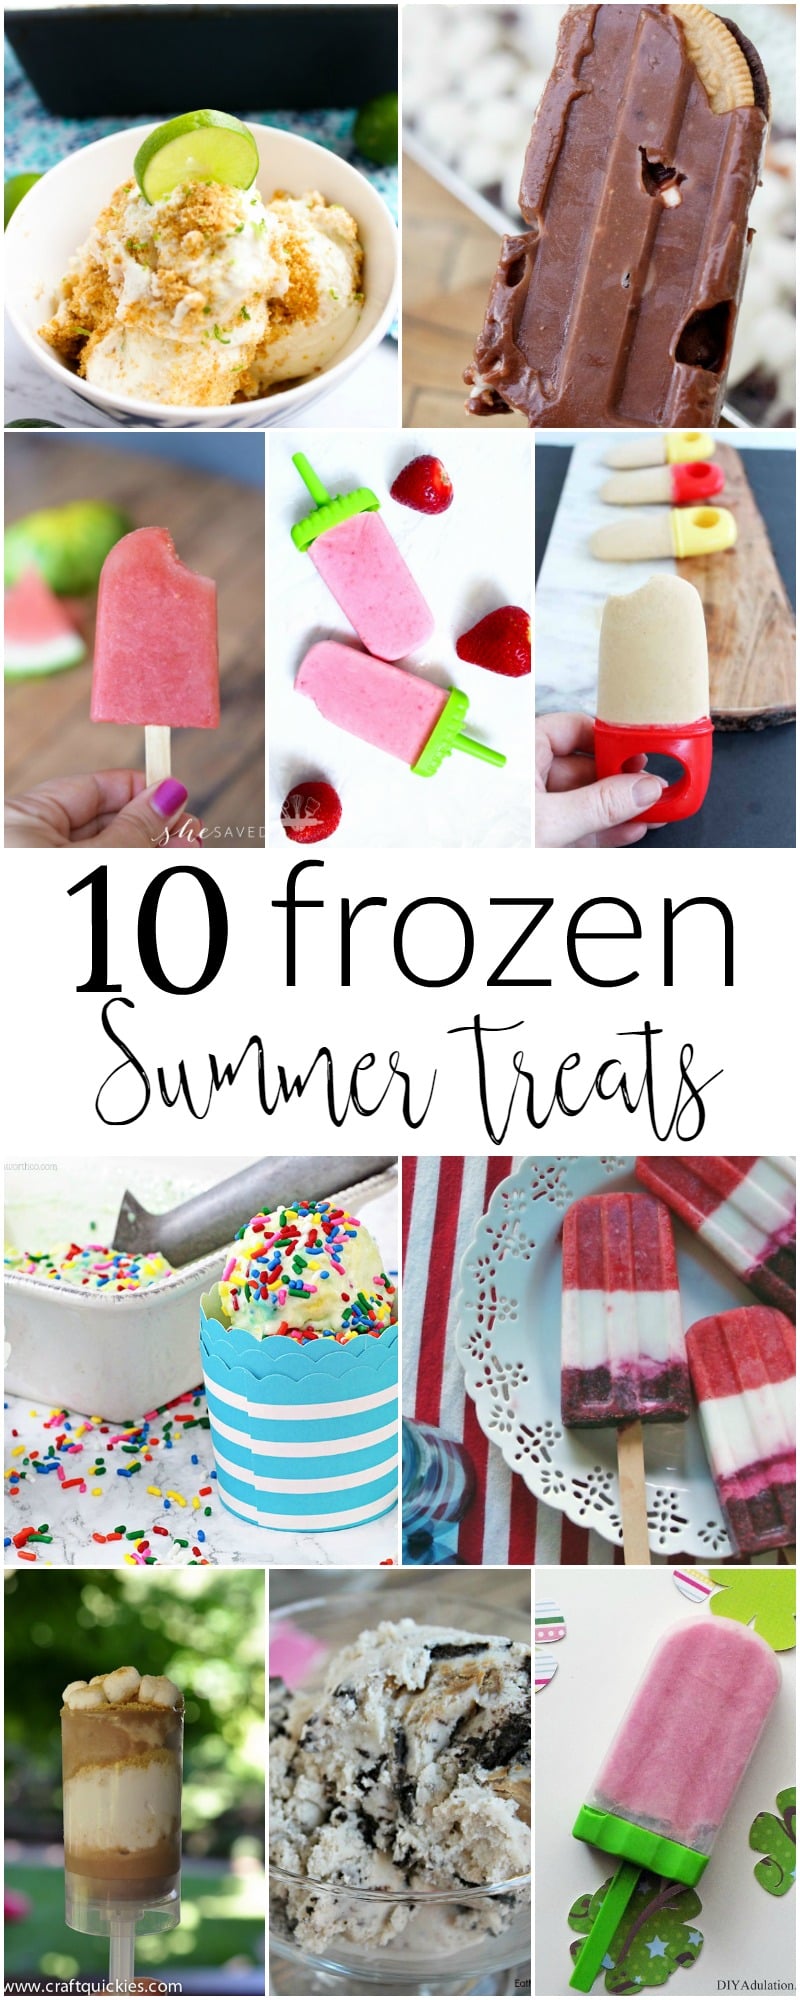 10 frozen summer treats to cool you down this summer. Make your own ice cream and popsicles this season.